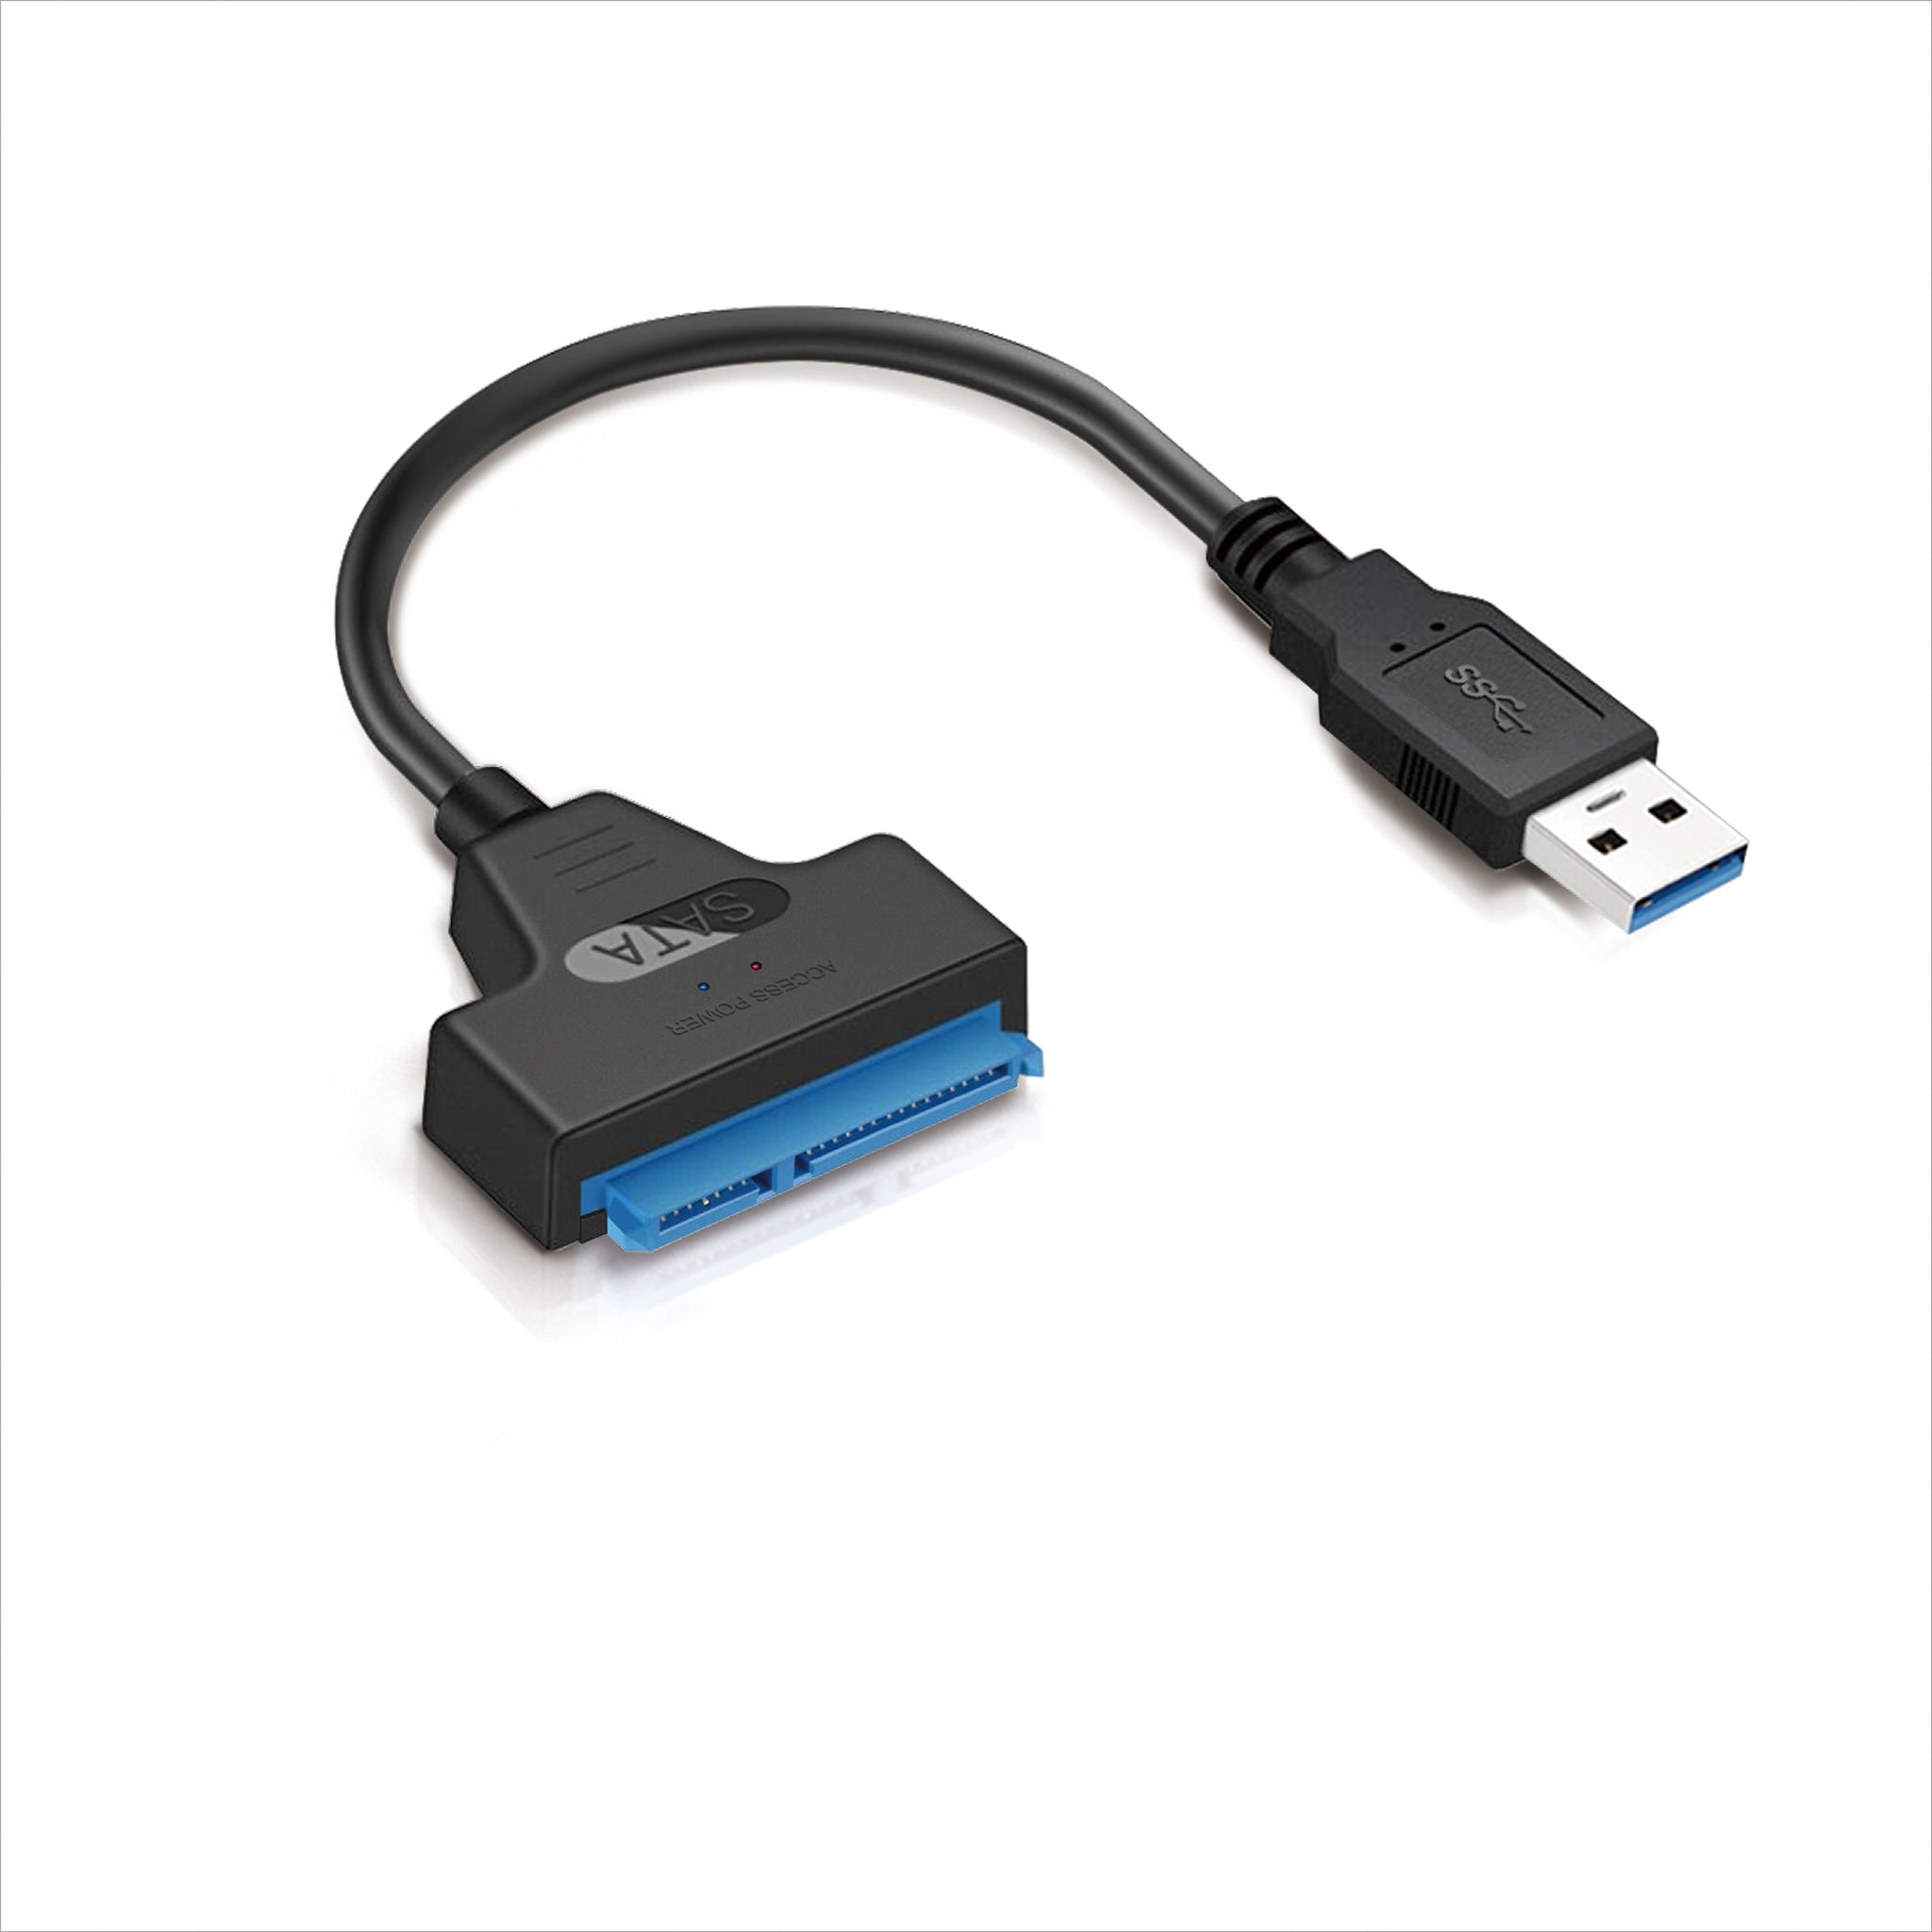 SATA to USB Cable - USB 3.1 (10Gbps) - UASP